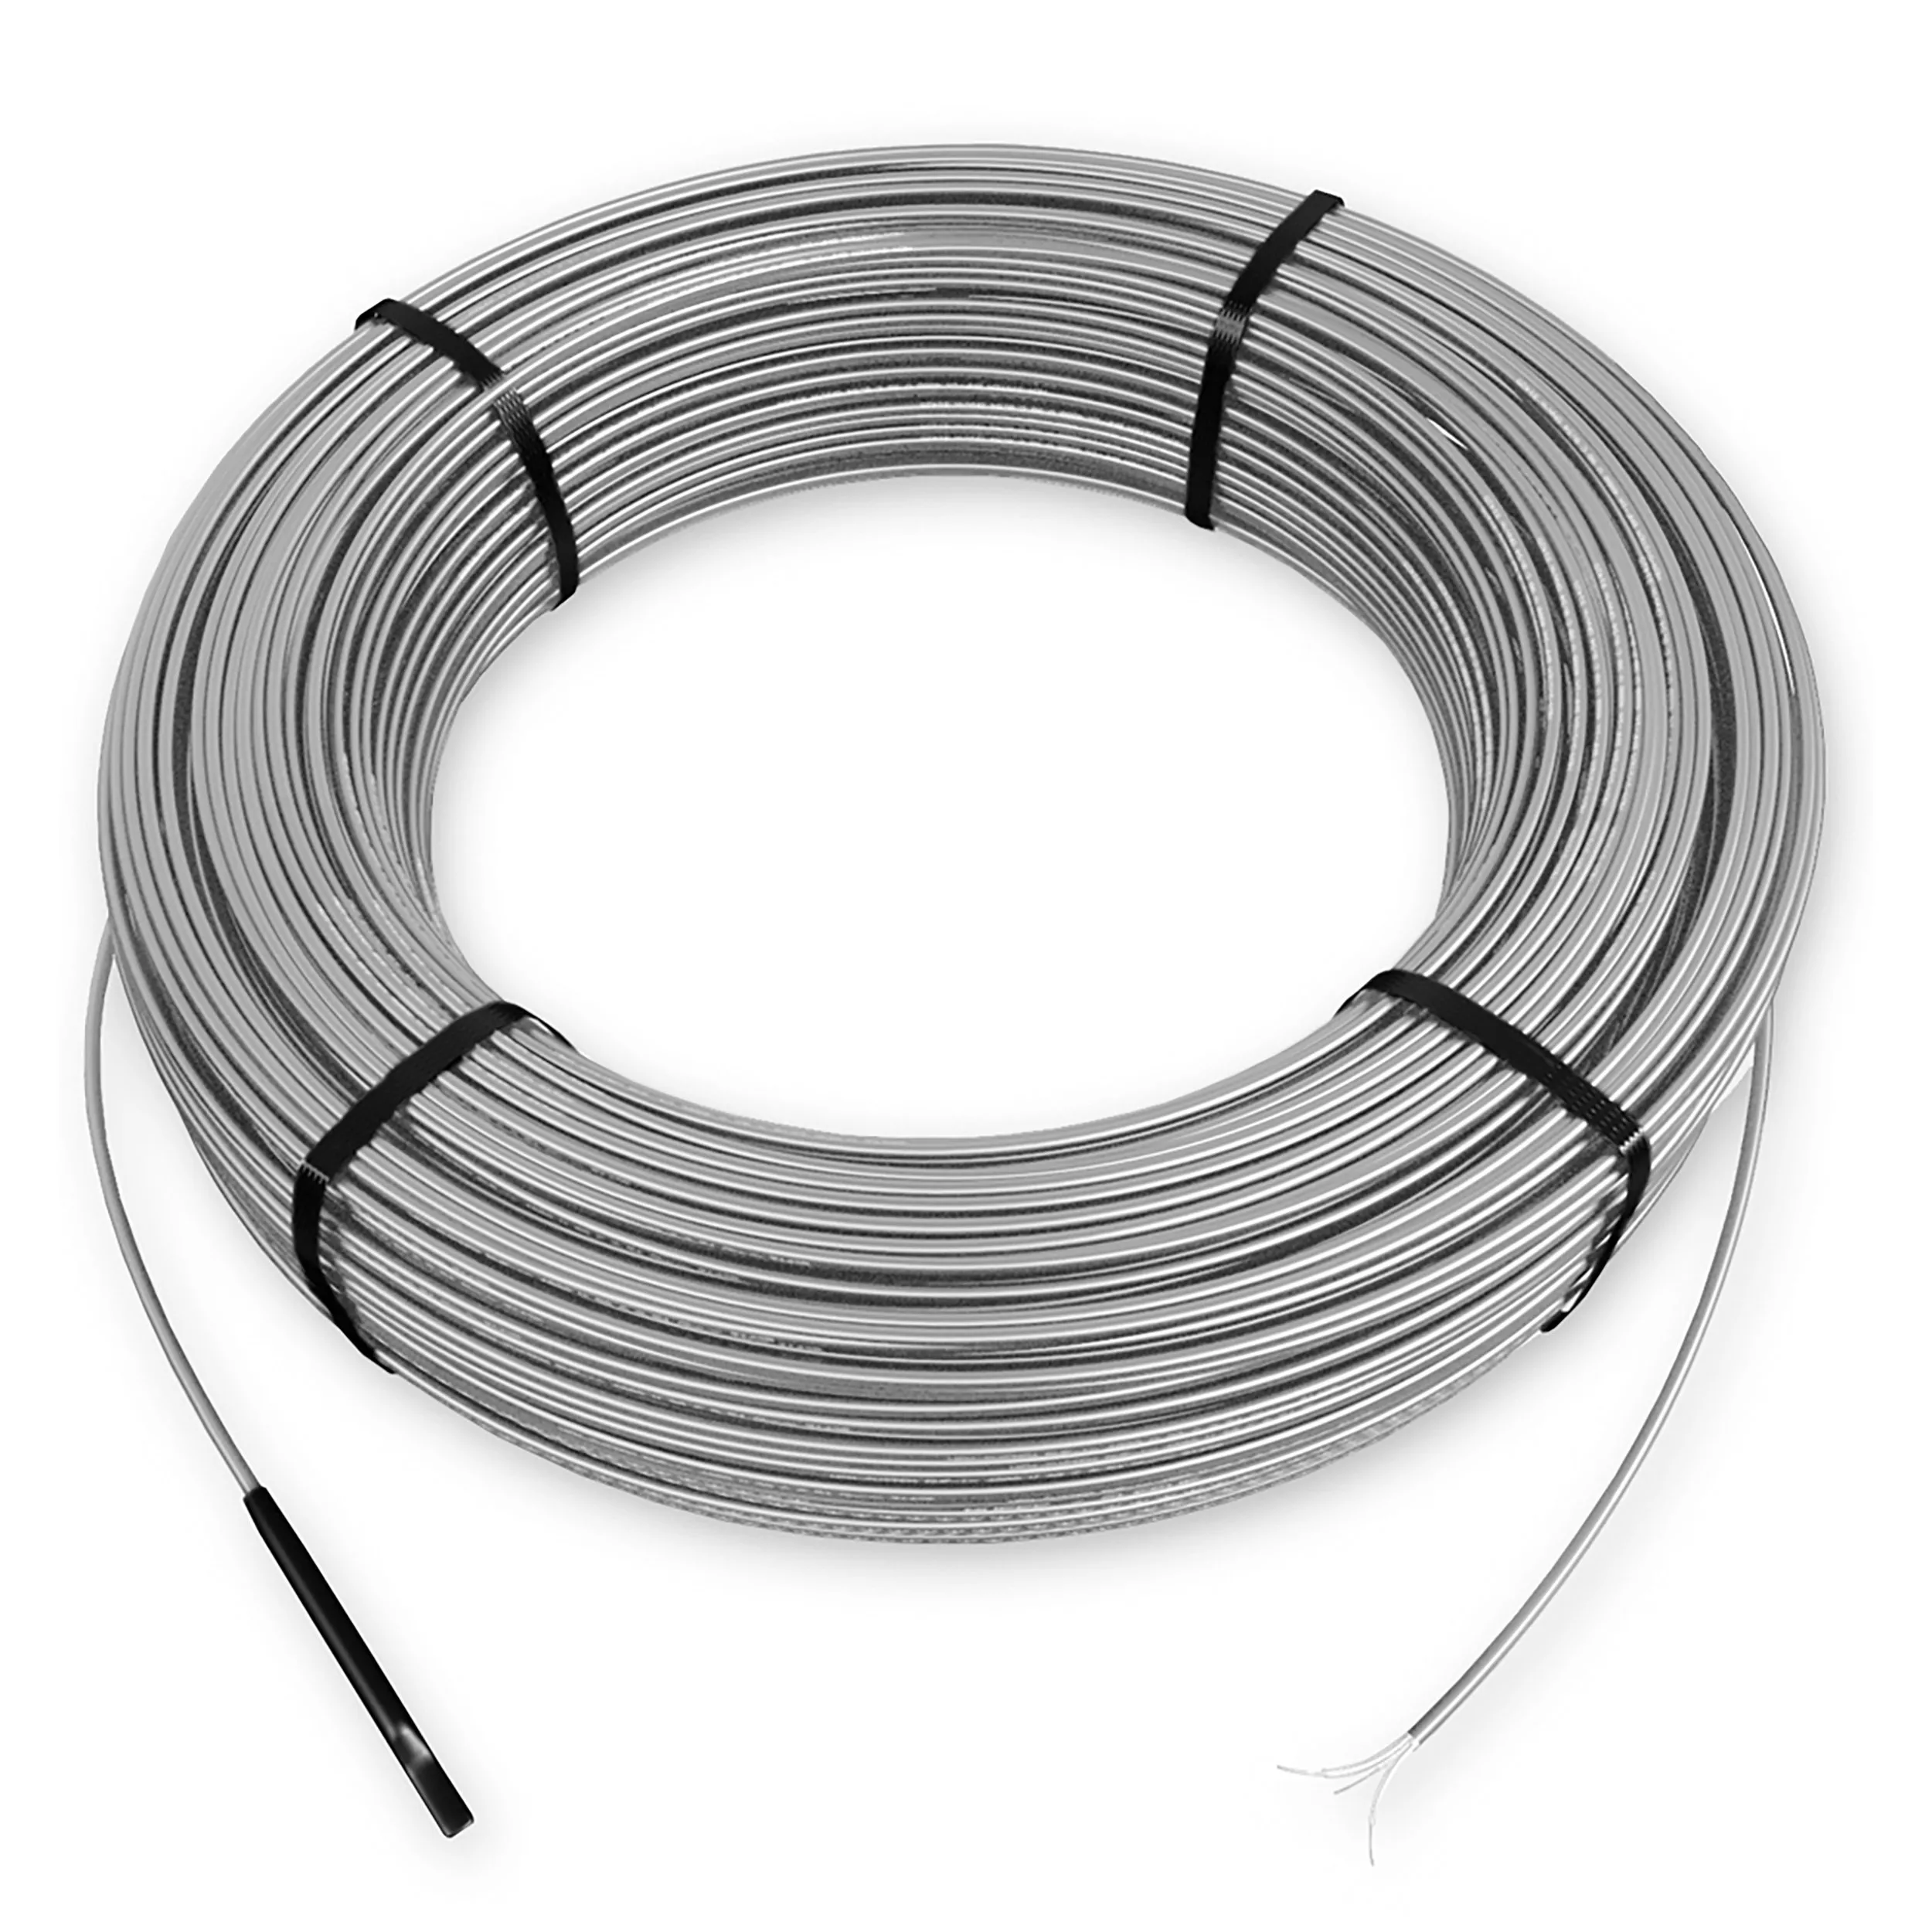 Schluter 134.3sqft. Ditra Heat 120V Heating Cable